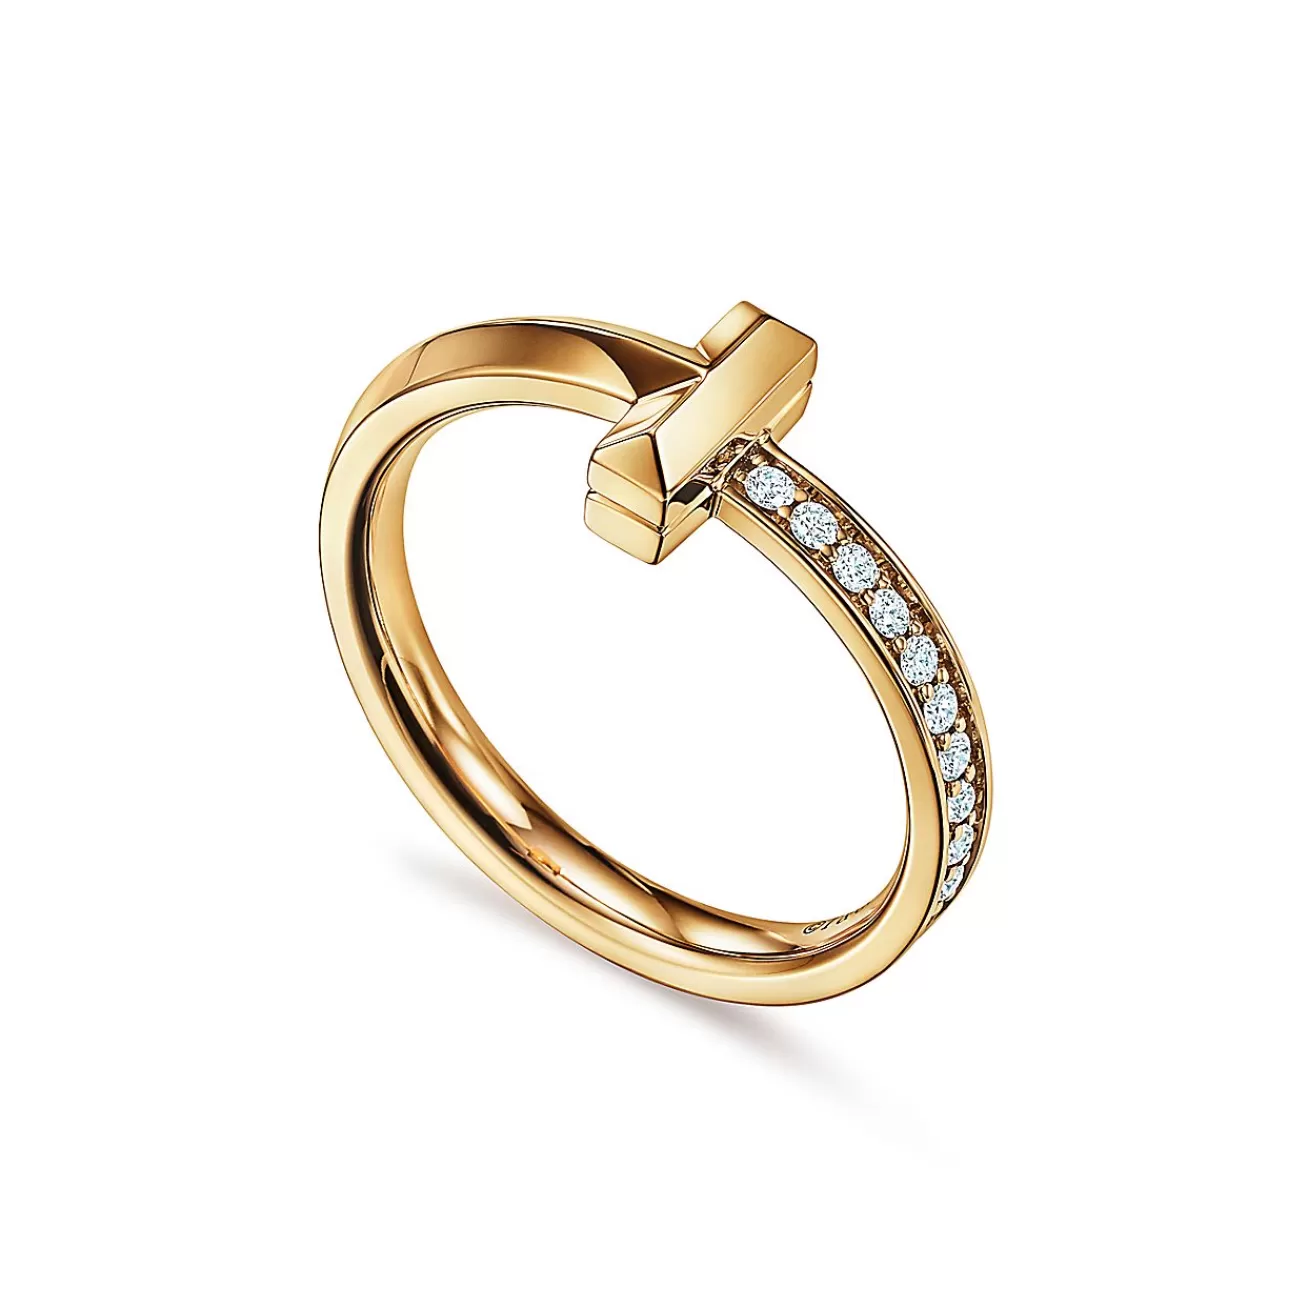 Tiffany & Co. Tiffany T T1 Ring in Yellow Gold with Diamonds, 2.5 mm Wide | ^ Rings | Men's Jewelry